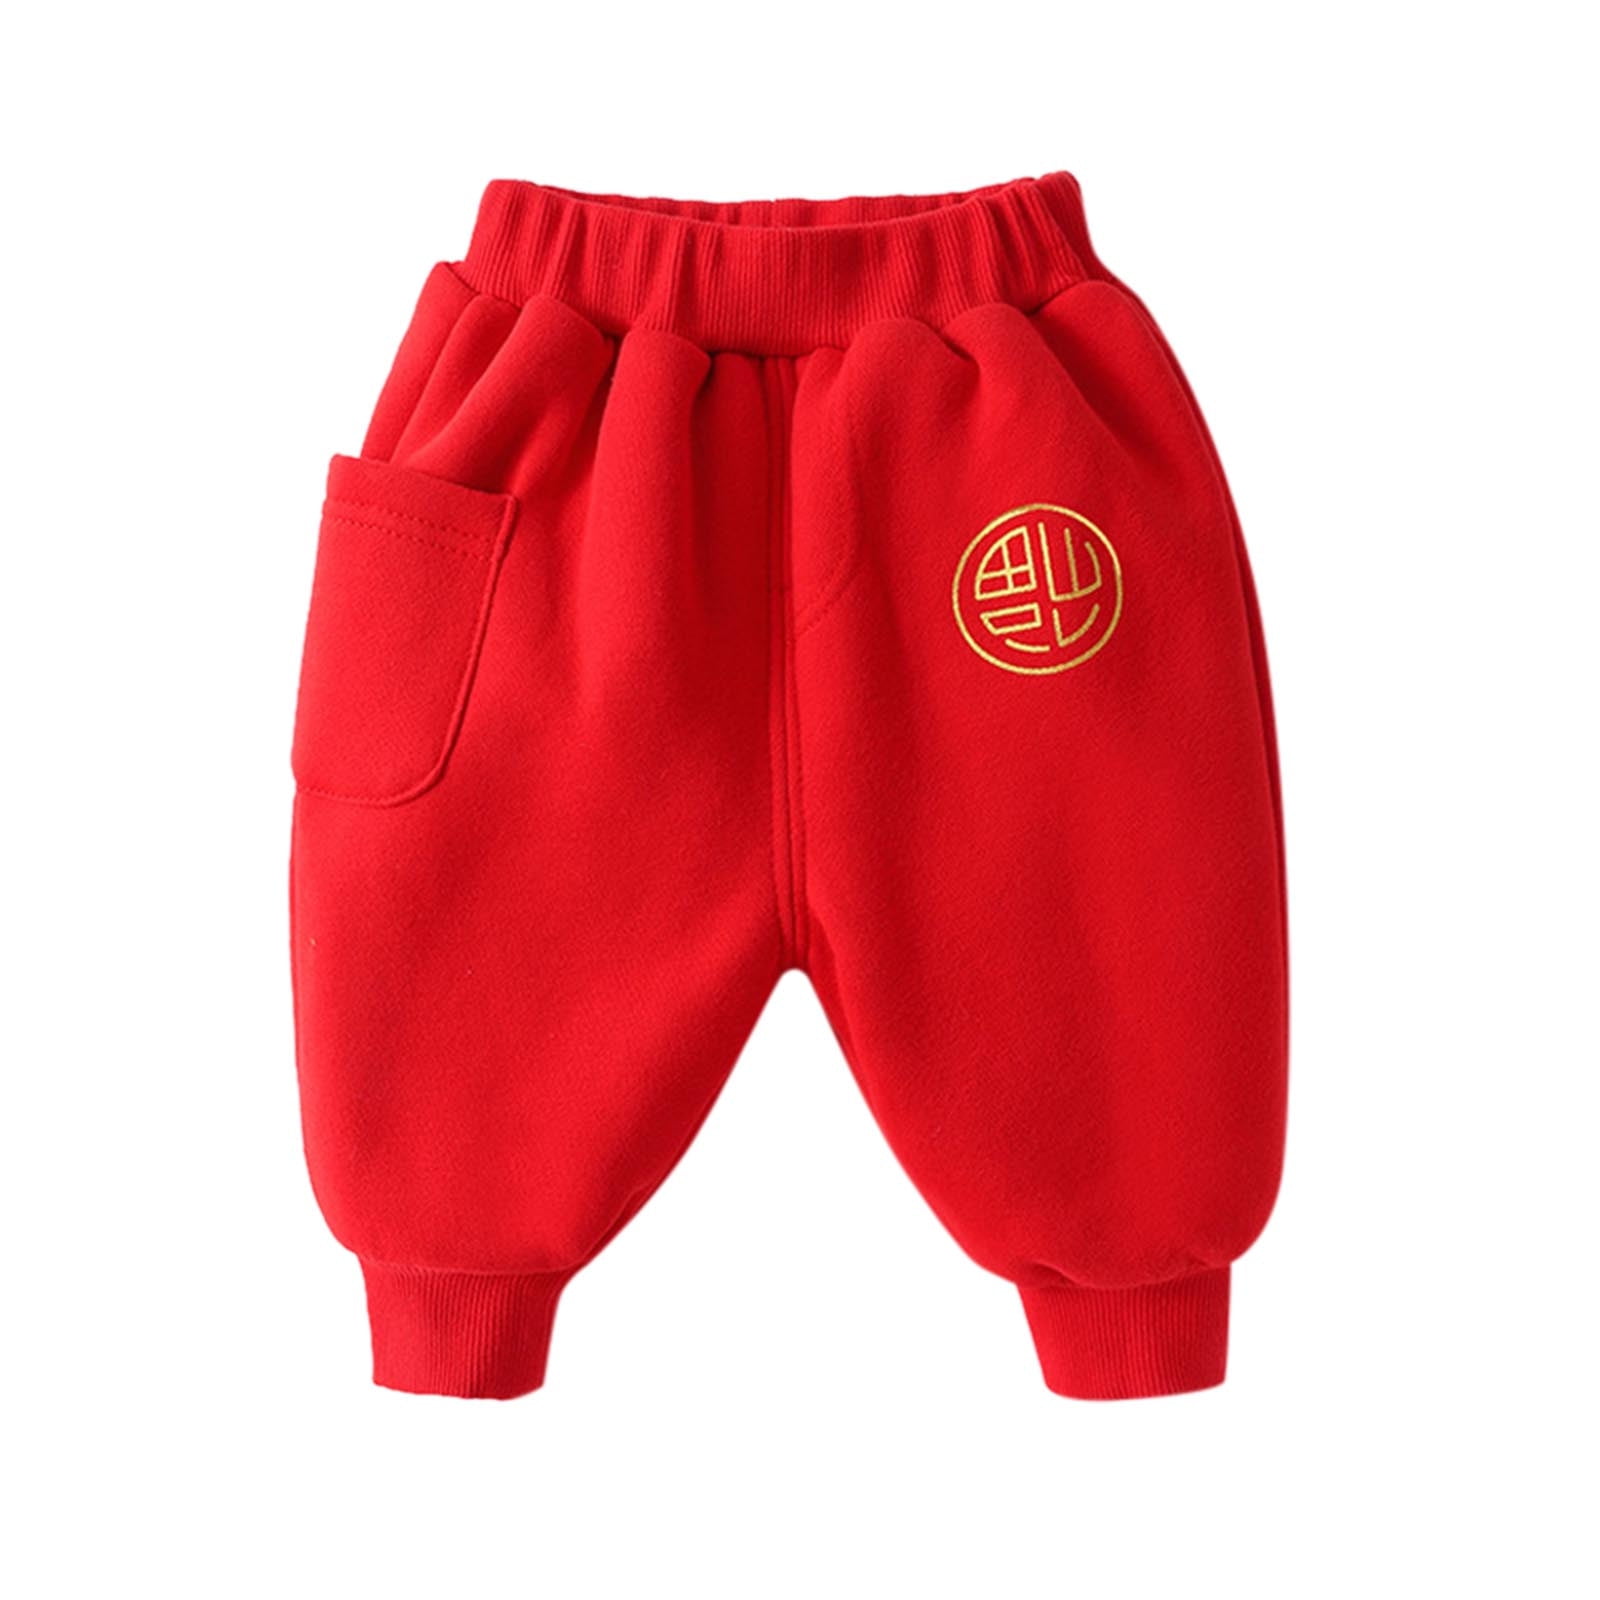 ZHAGHMIN Boys Pants Size 7 Kids Toddler Baby Girls New Year Print Winter Trousers Tang Suit Outfit Set Track Monkey Clothes Hoodie And 235bdb76 4c93 4ac7 b556 425c4af53215.8f630d2f72f2f909a4486cd33f2a2318